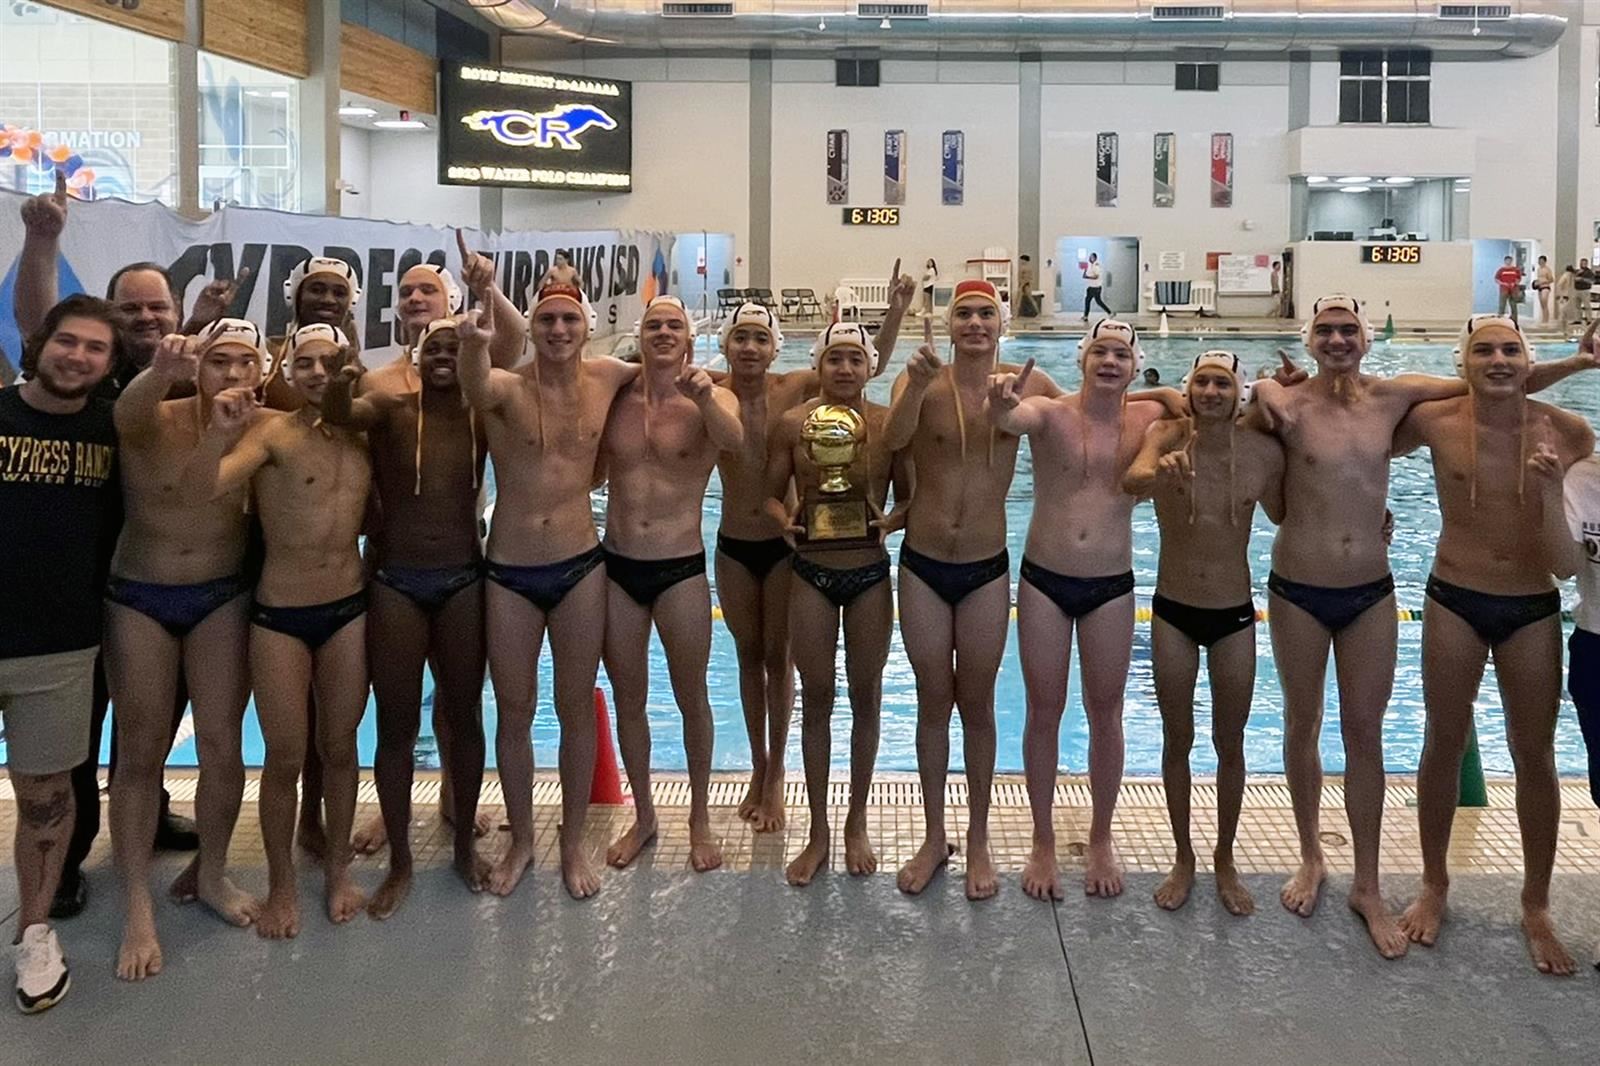 The Cypress Ranch High School boys’ water polo team won the District 16-6A Championship with a 10-0 record in league play.